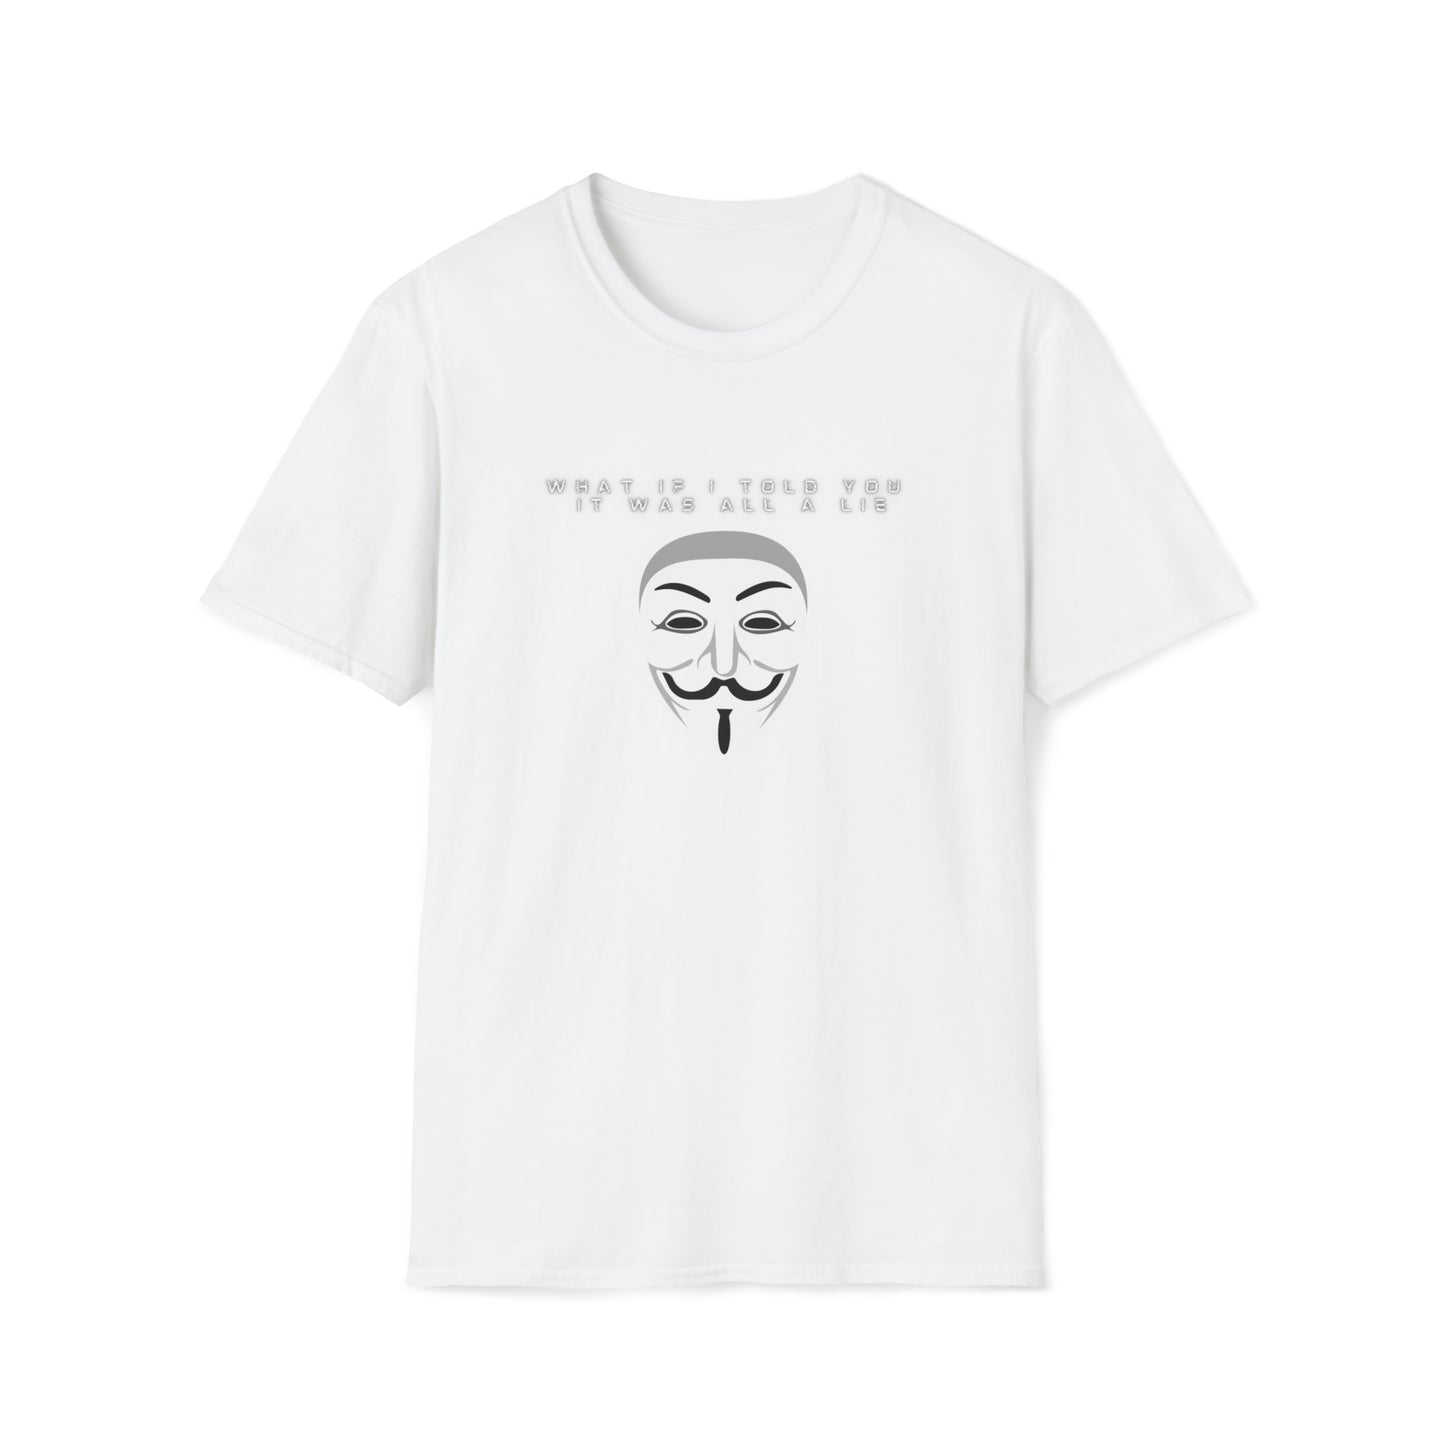 IT'S ALL A LIE ANONYMOUS T-SHIRT